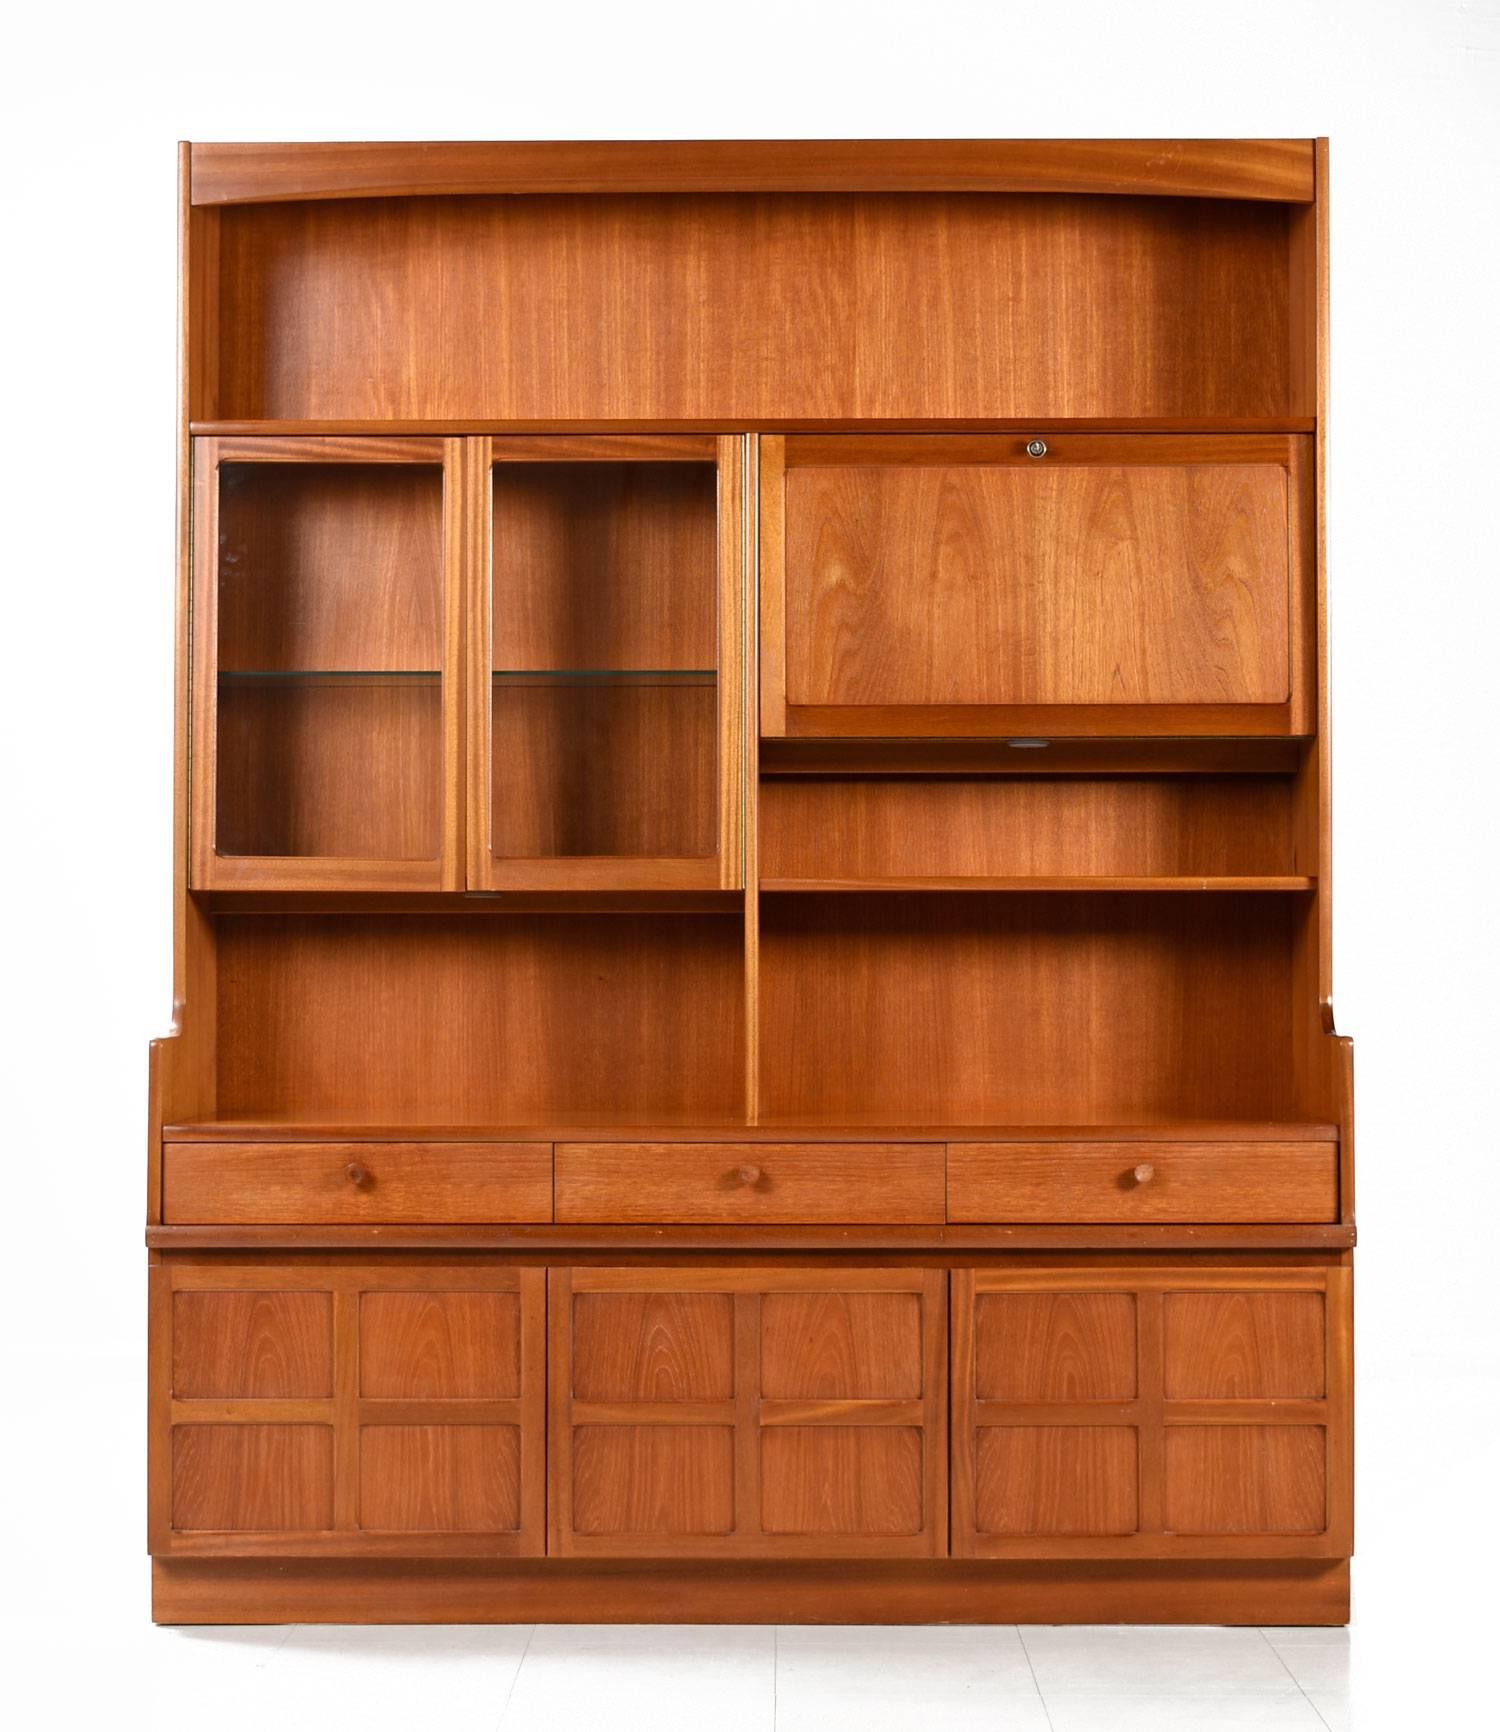 Rare teak hutch by Nathan, made in Great Britain. We don't often see teak furniture from the U.K., items like this are a special treat. This is one of finest teak hutches we've had the pleasure to present. The craftsmanship is exquisite and the